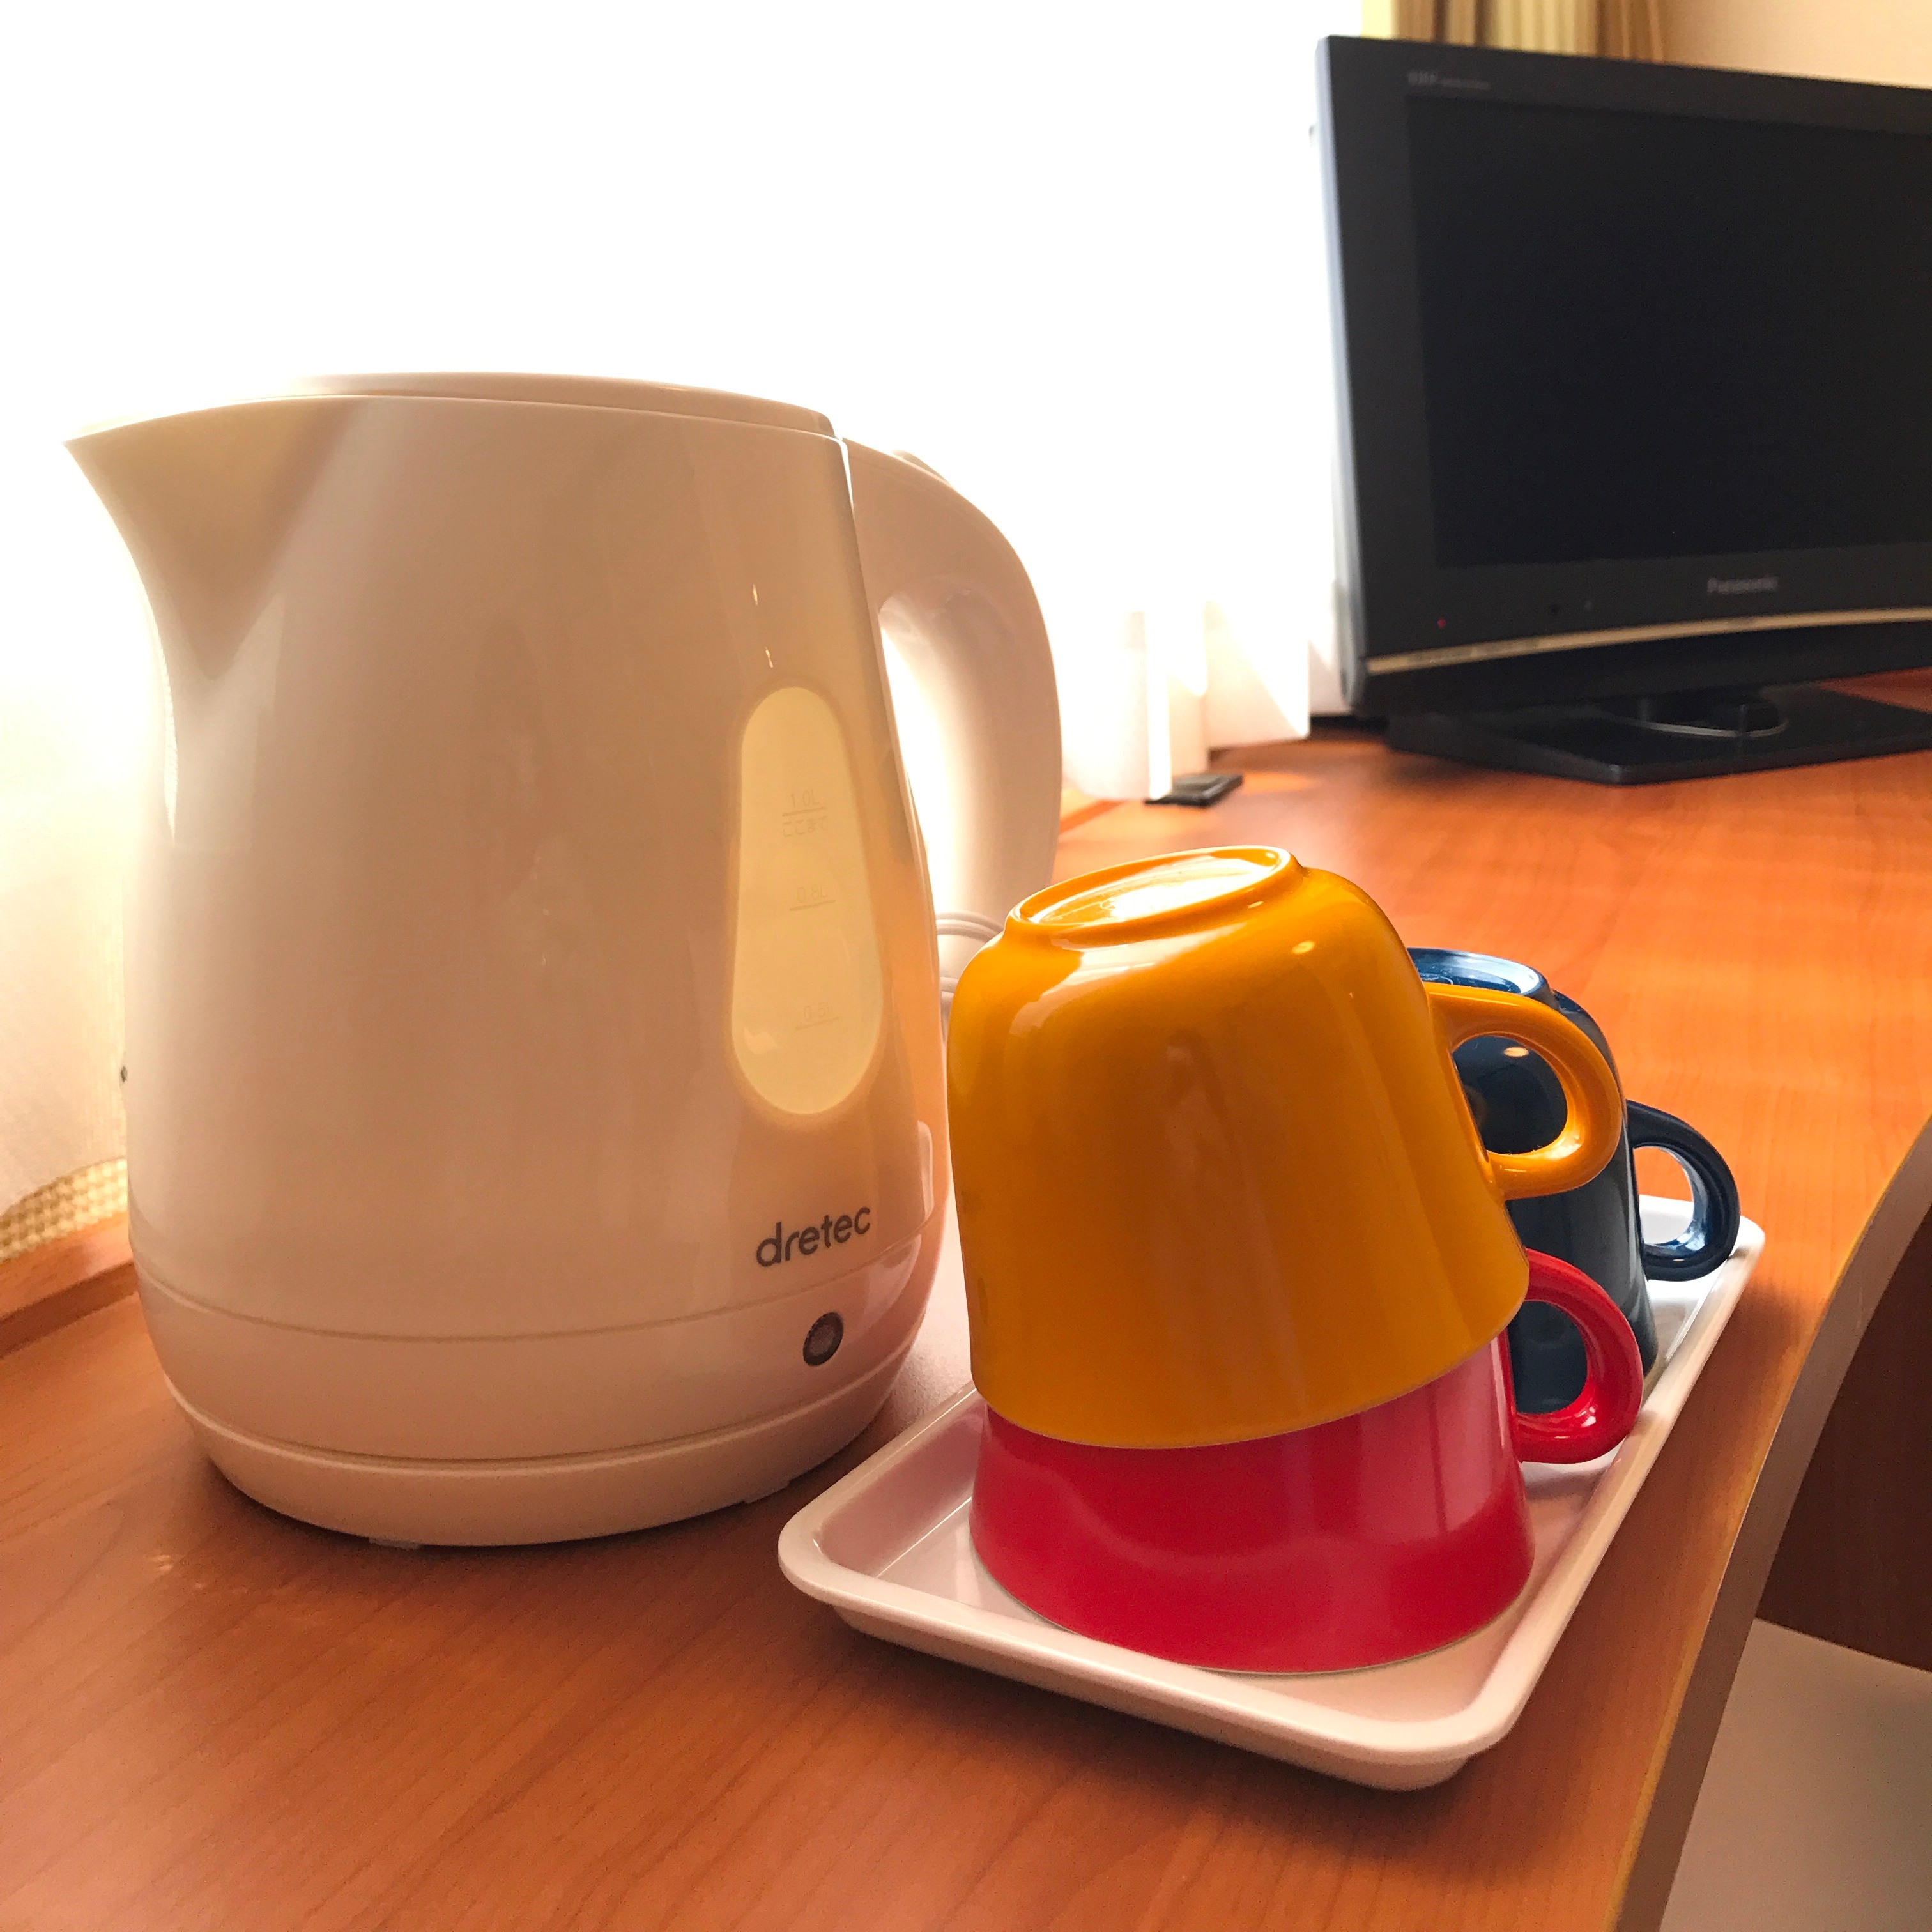 ◆ Electric kettle / cup ◆ Available in guest rooms.